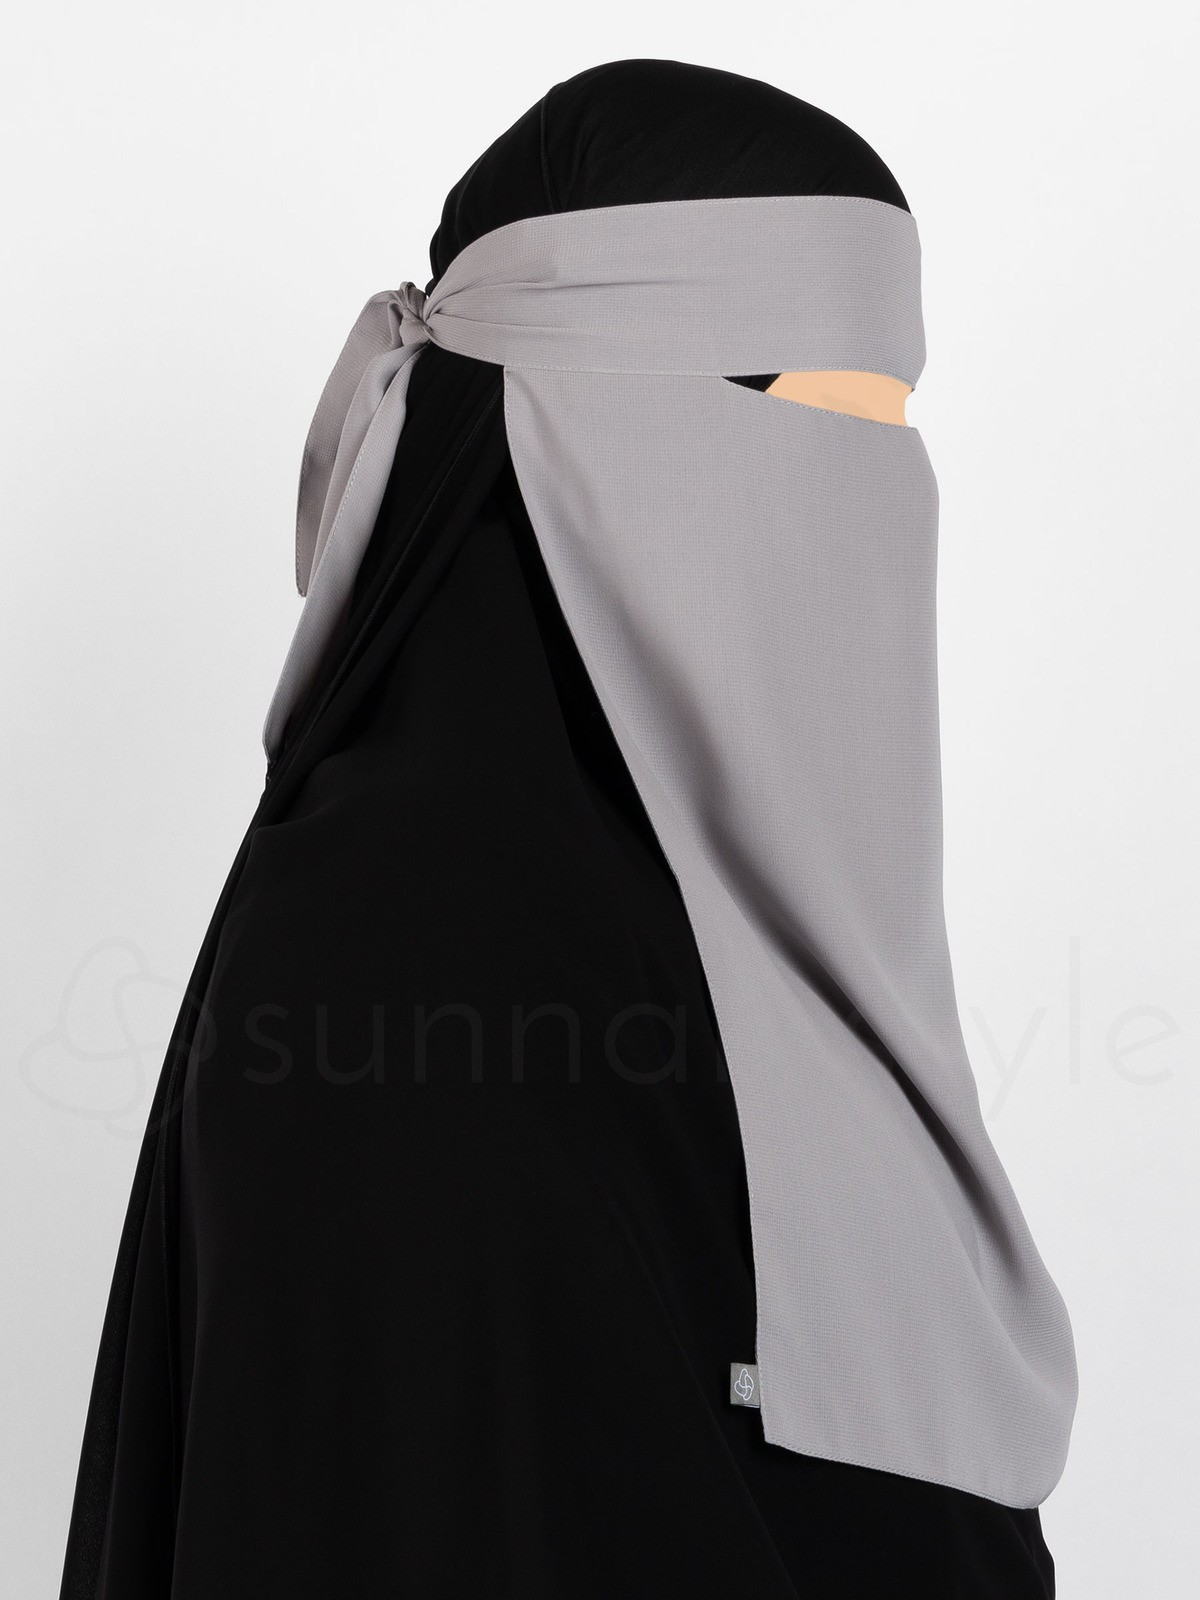 Sunnah Style - One Layer Niqab (Cement)